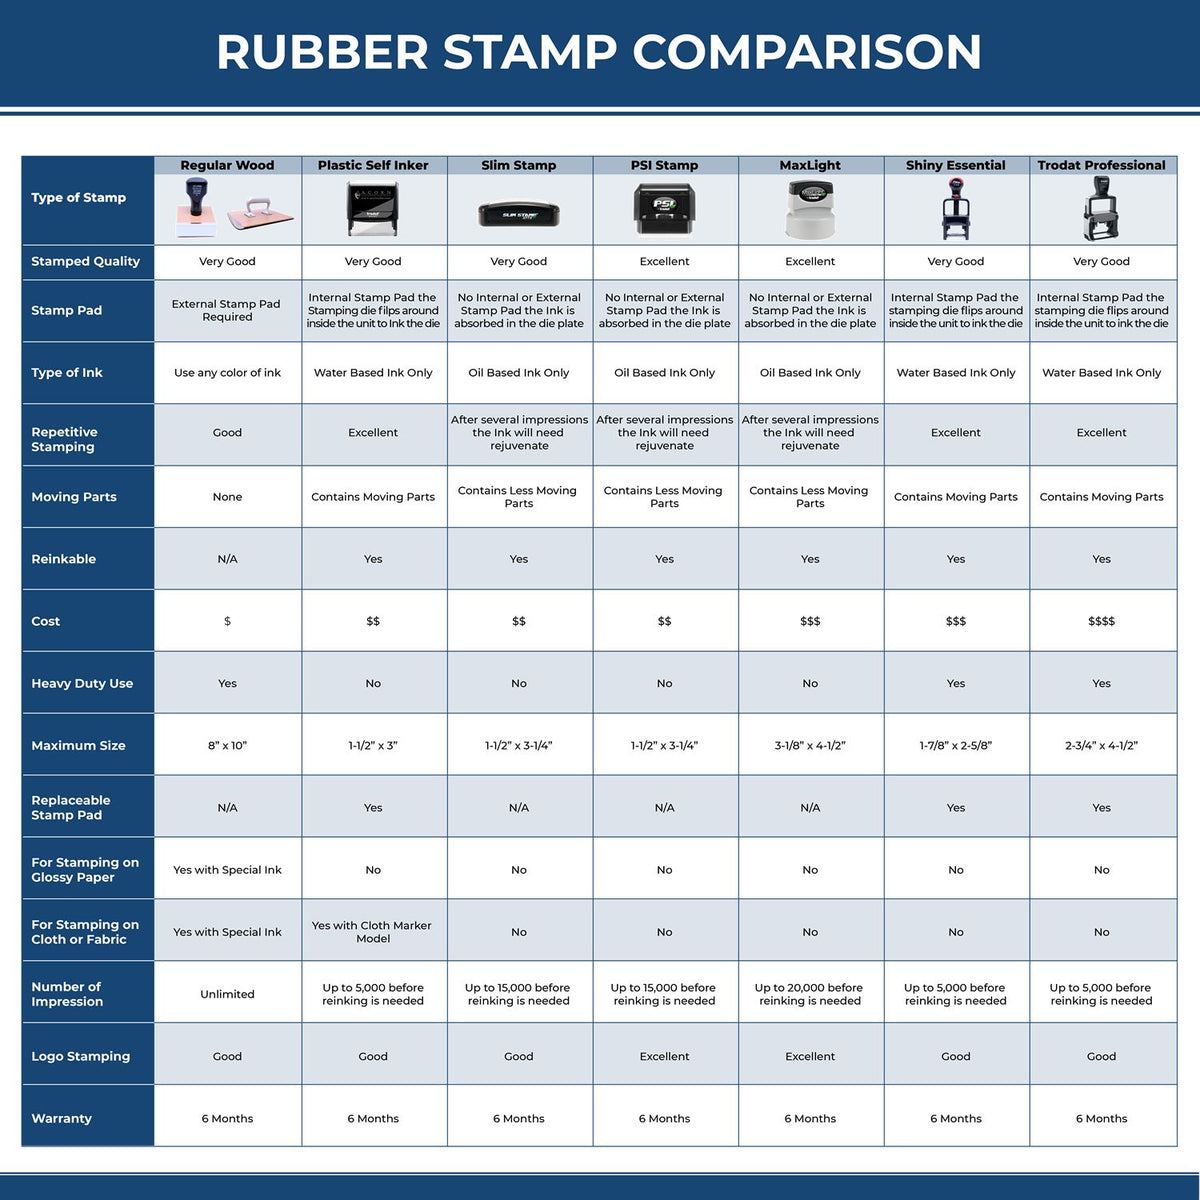 A comparison chart for the different types of mount models available for the Premium MaxLight Pre-Inked Illinois Landscape Architectural Stamp.